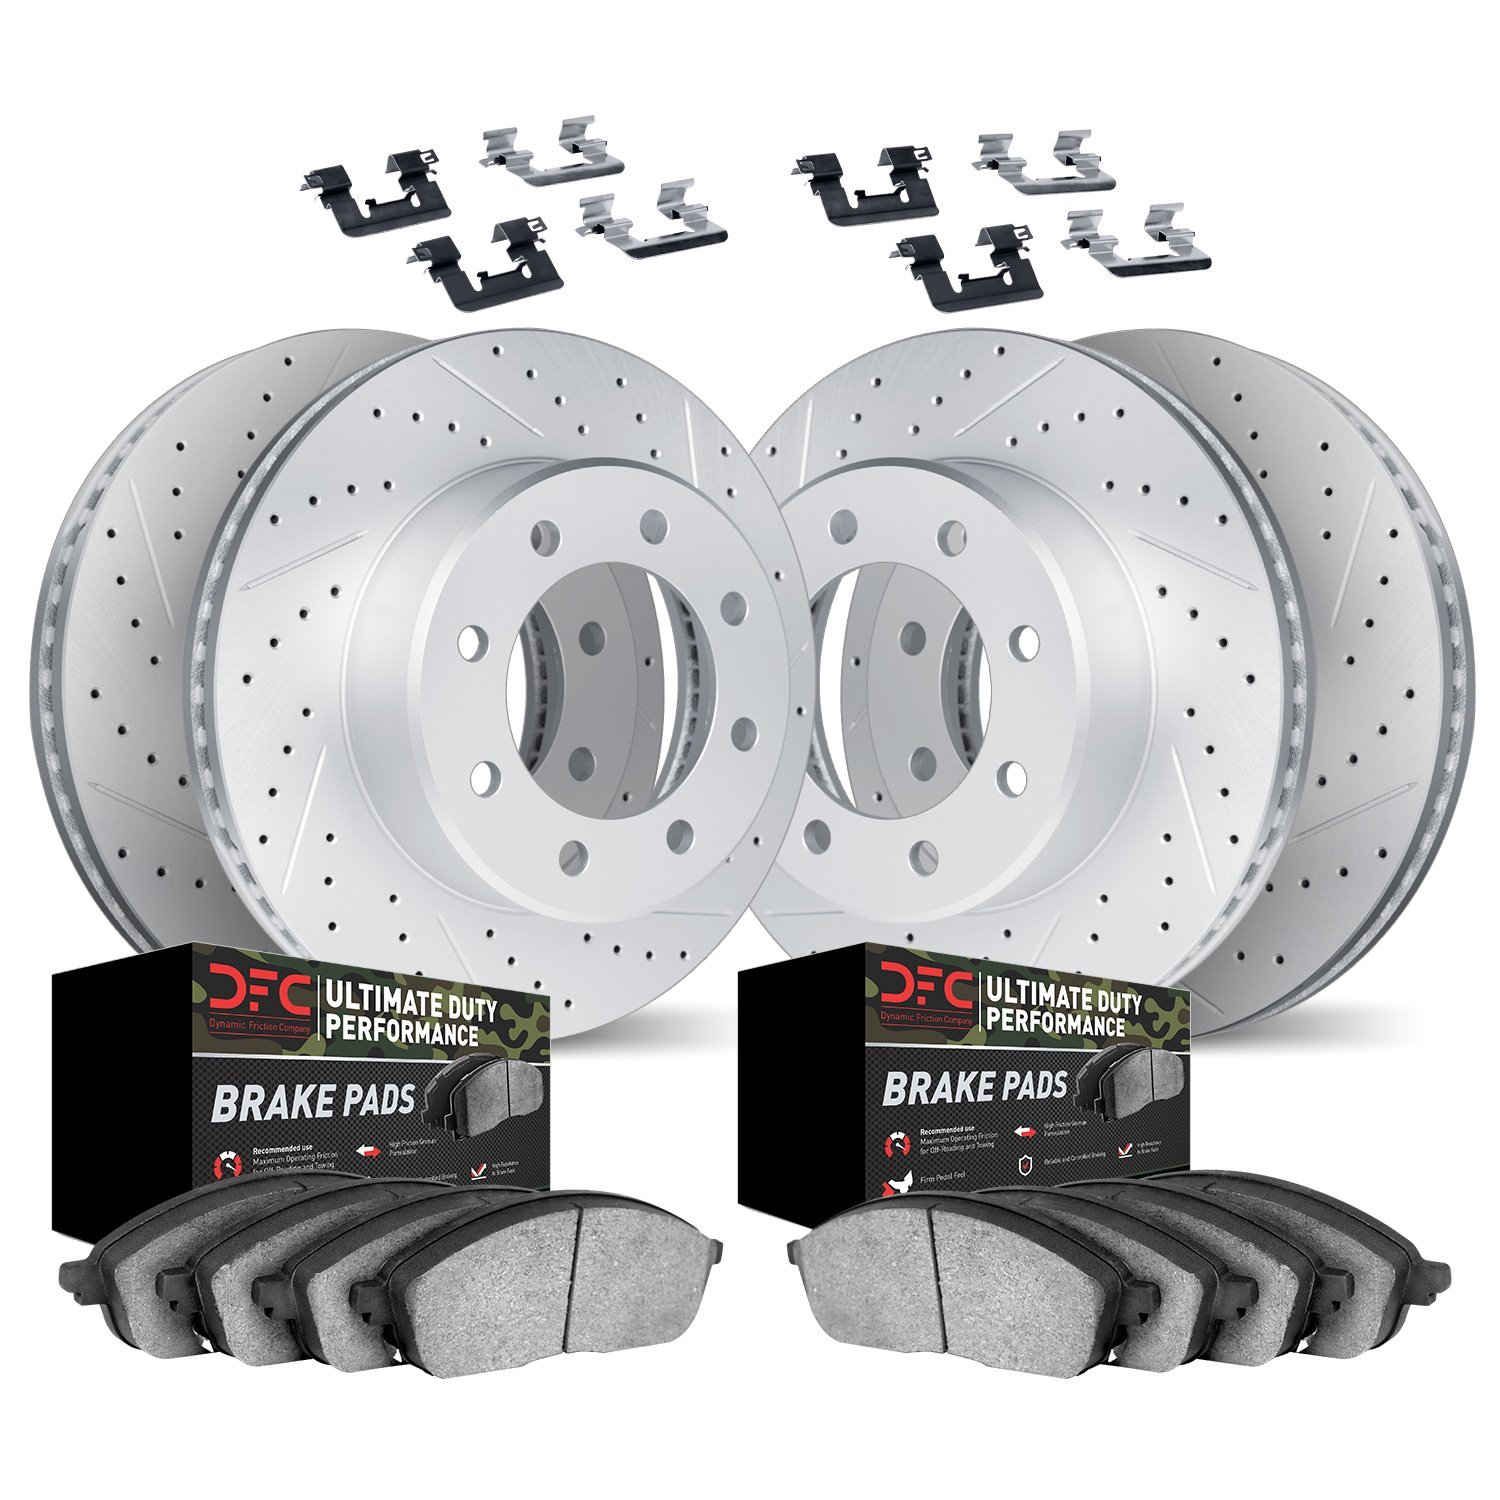 2414-54038 Geoperformance Drilled/Slotted Brake Rotors with Ultimate-Duty Brake Pads Kit & Hardware, 2012-2012 Ford/Lincoln/Merc